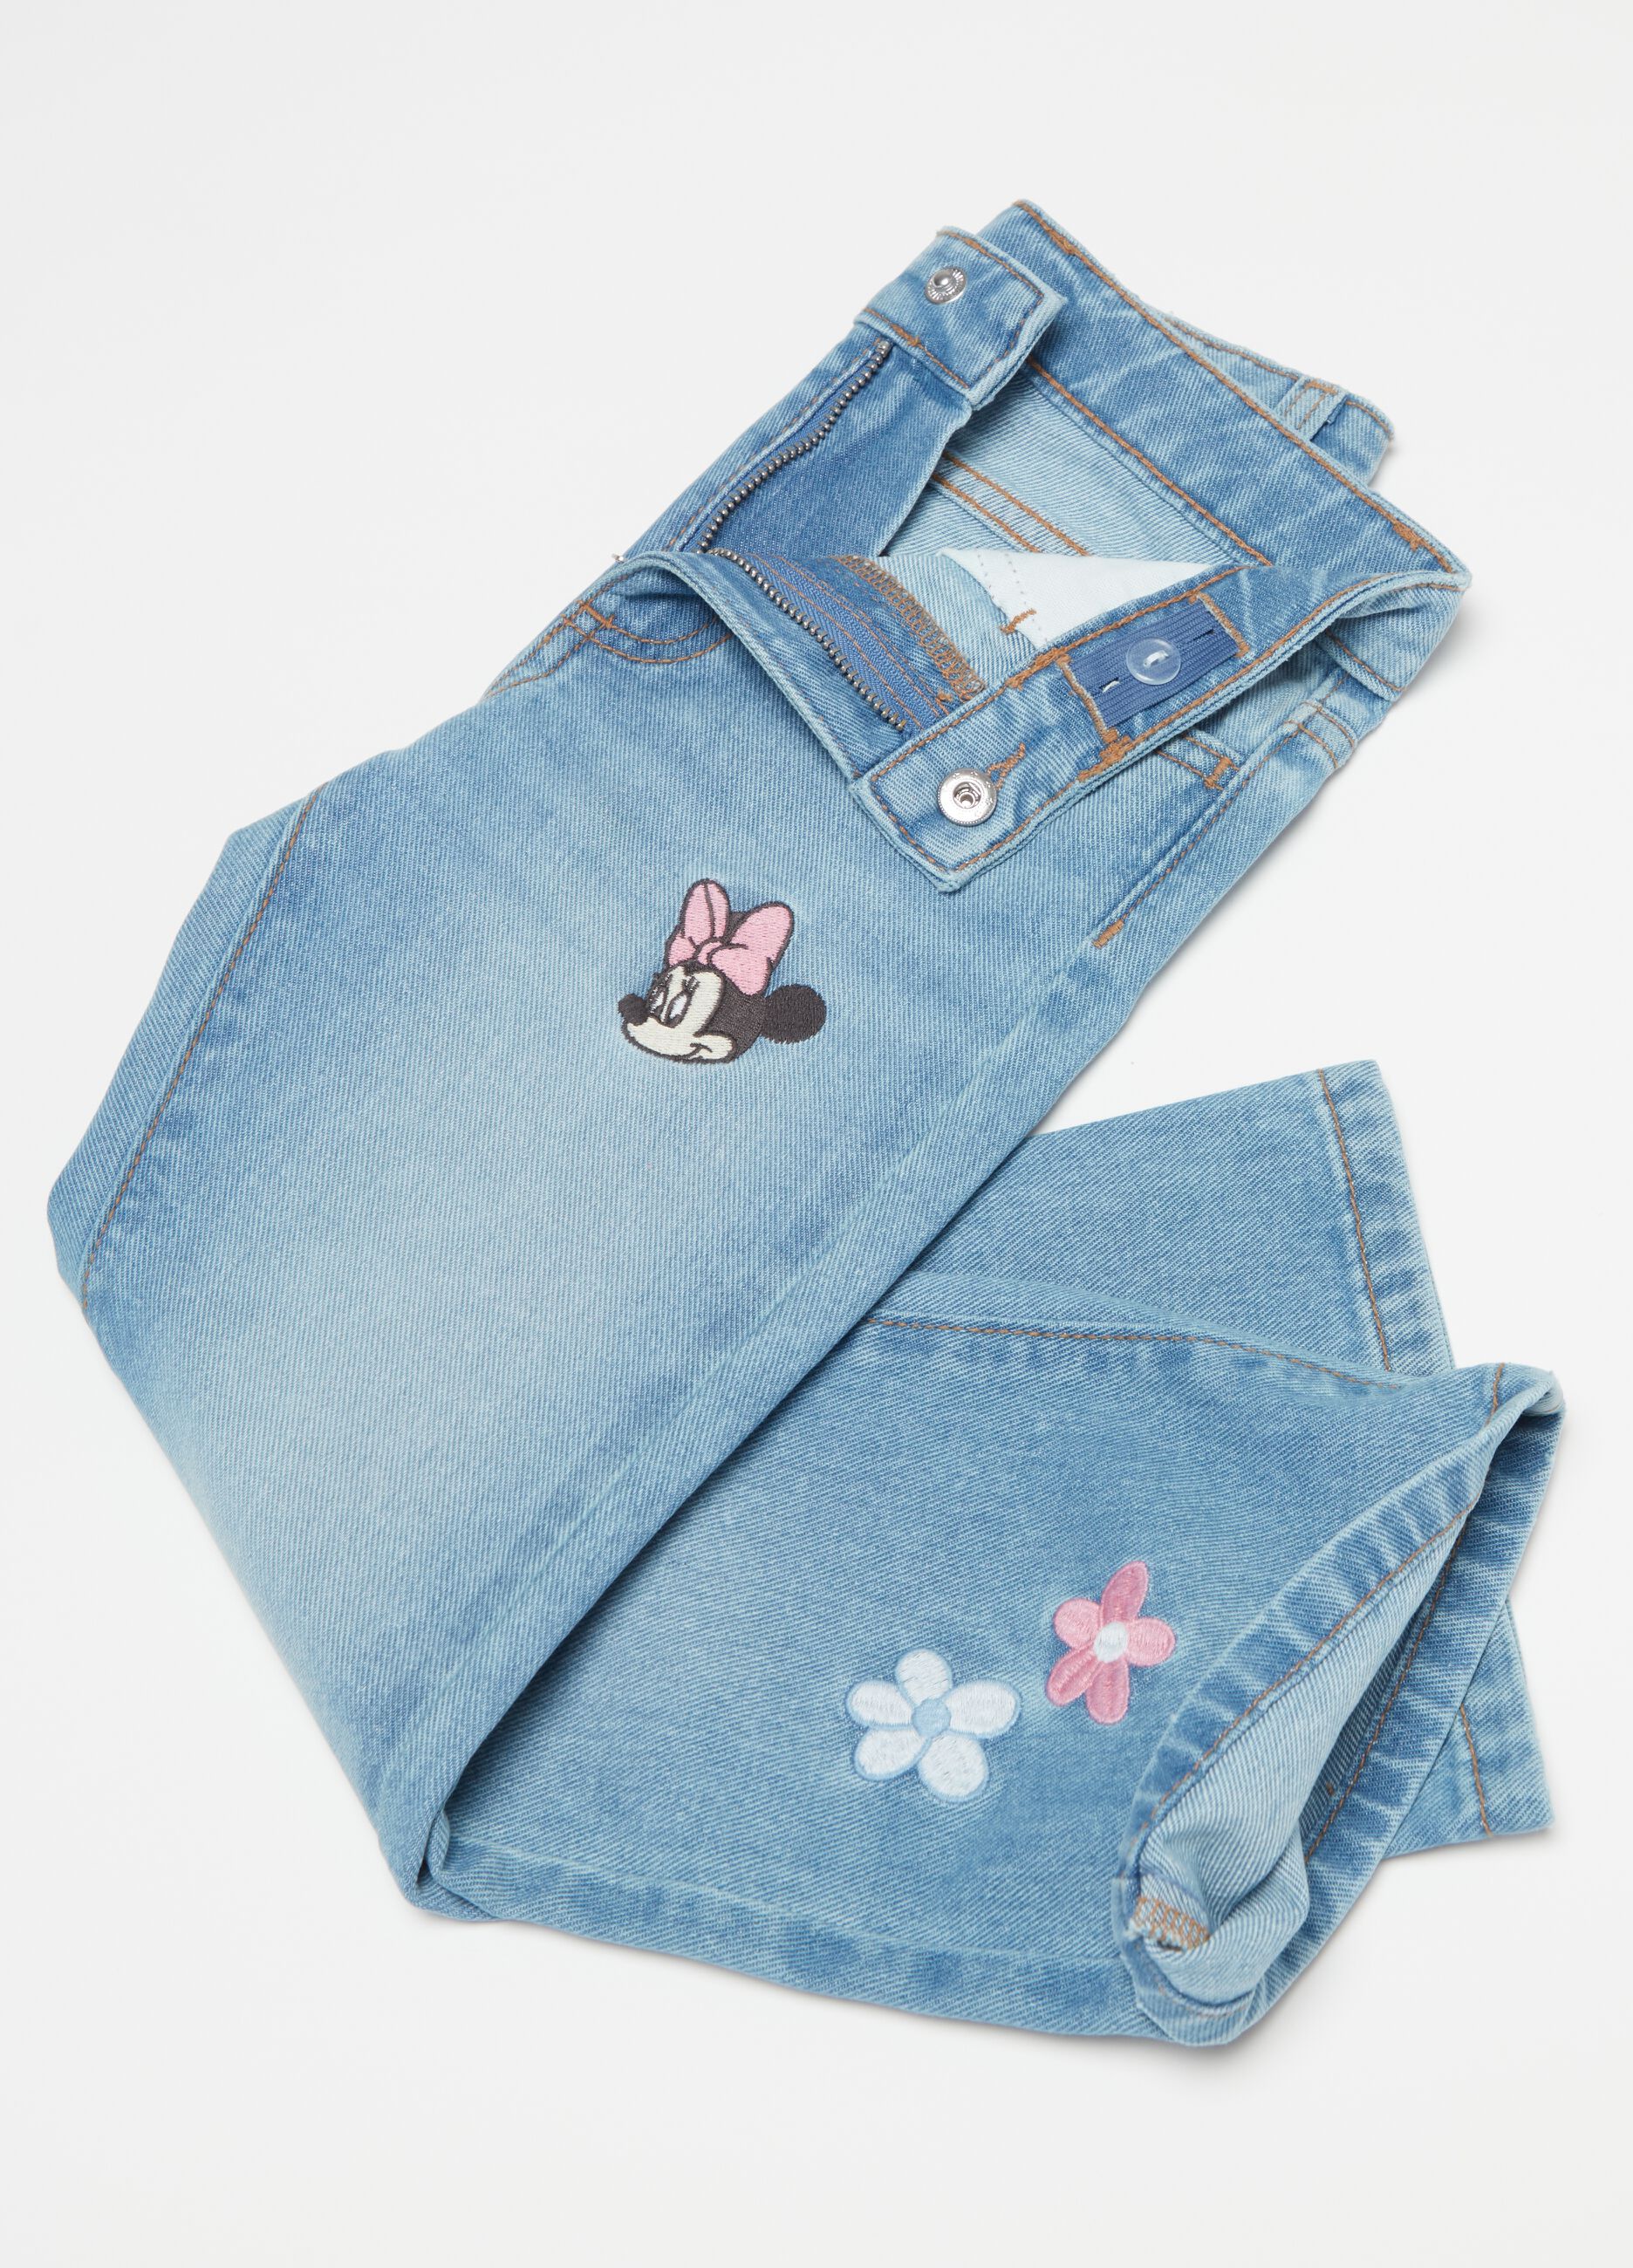 Flare-fit jeans with Minnie and Mickey Mouse embroidery